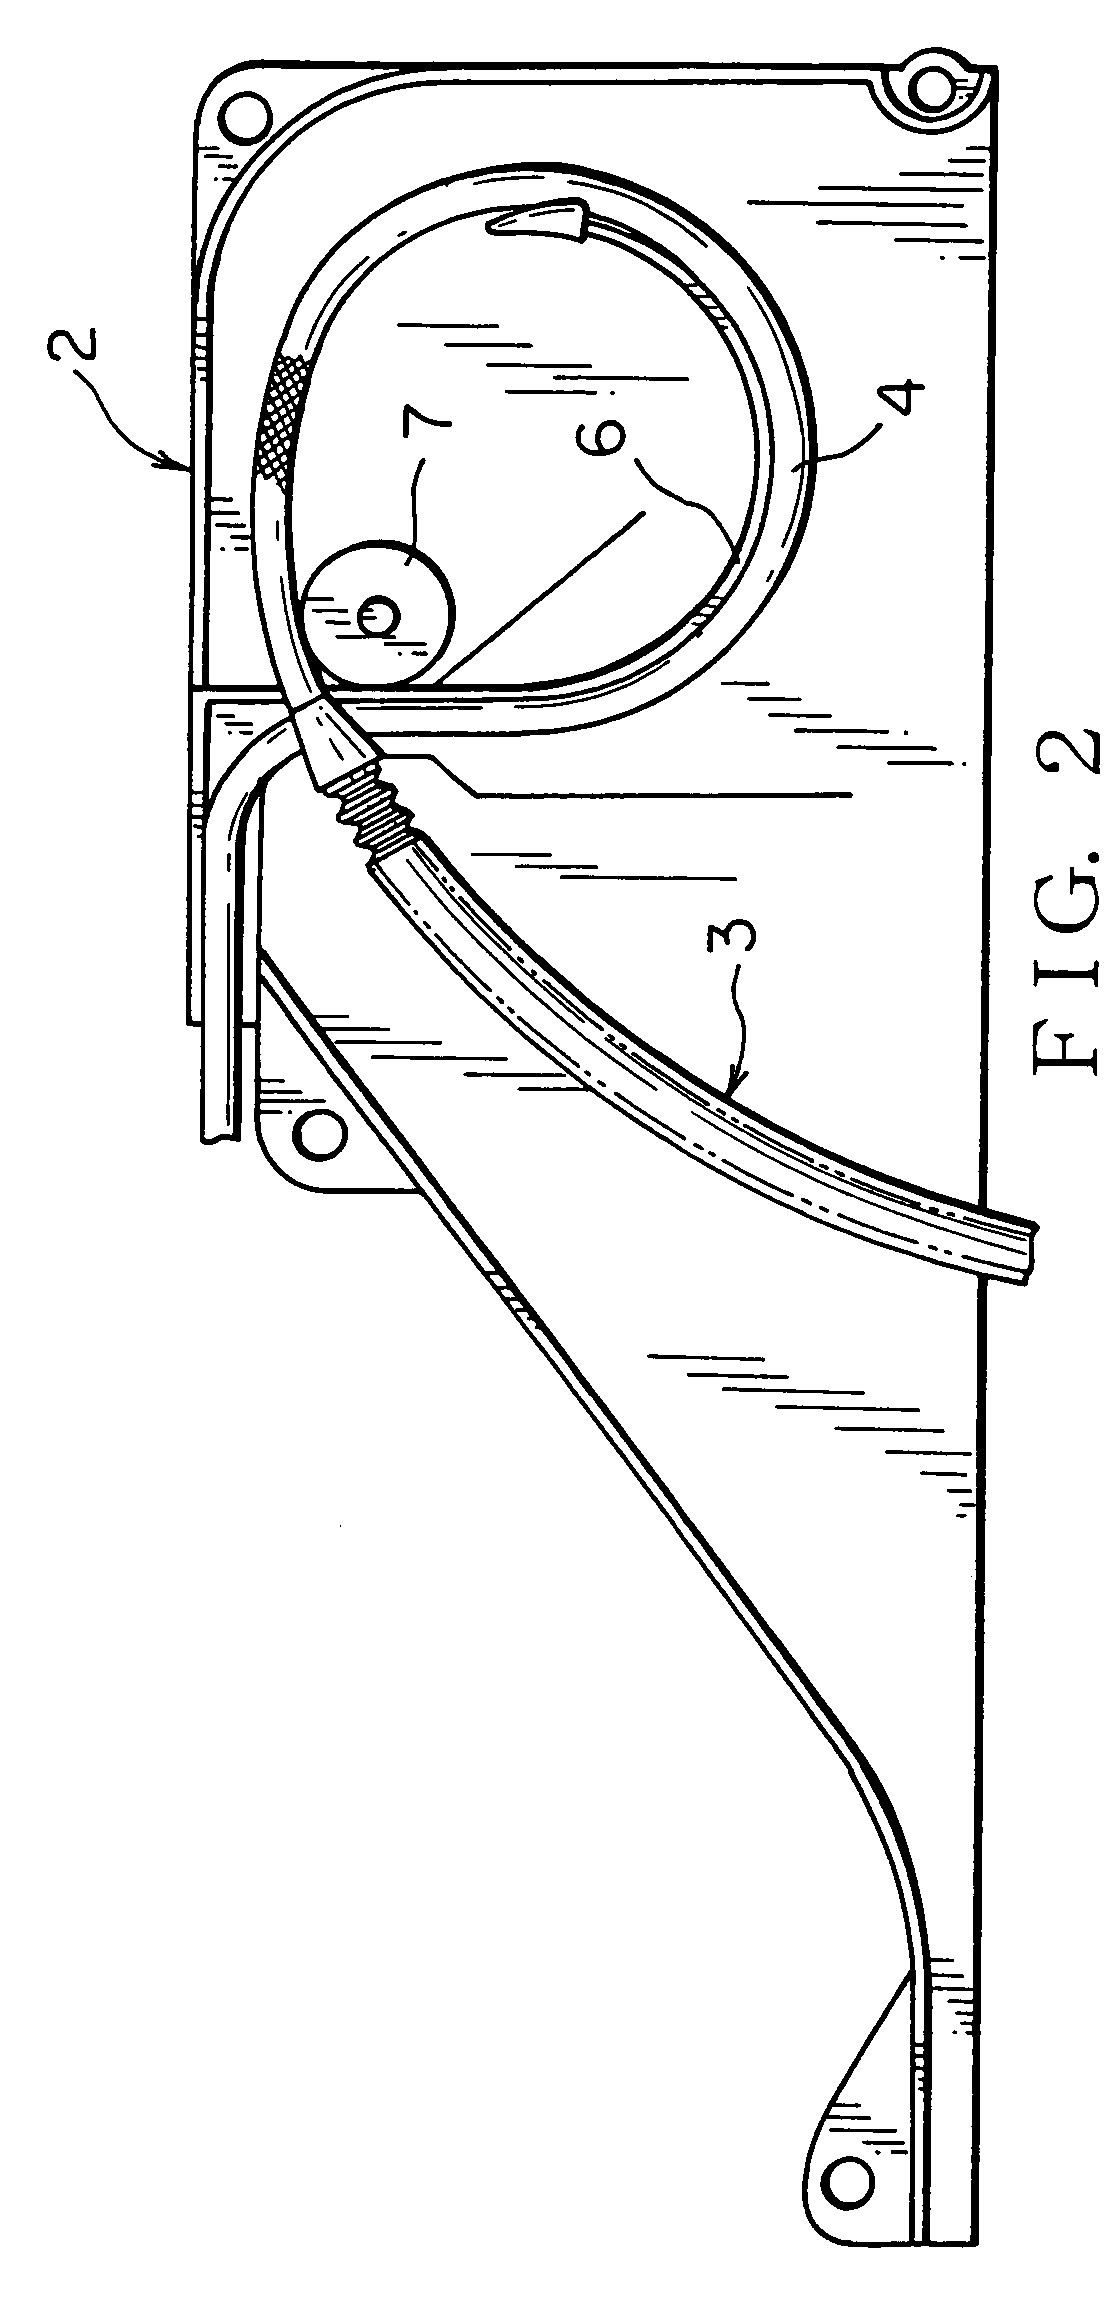 Continuous electric power supply device